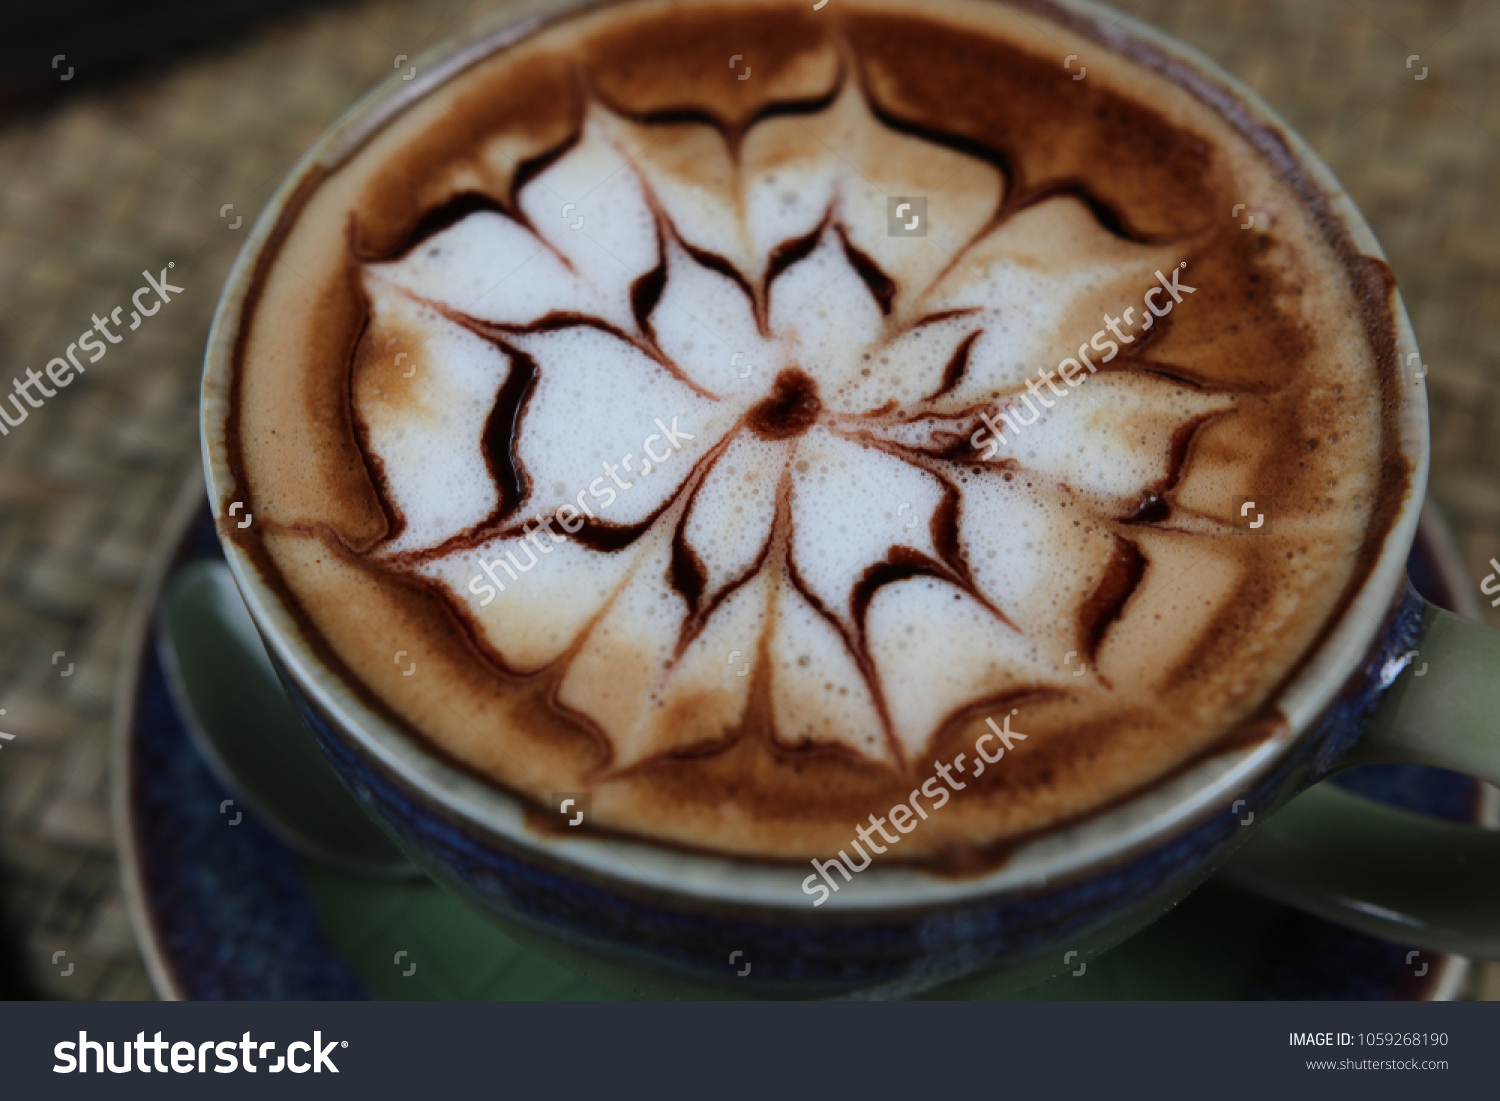 Closed up Hot coffee Latte beautiful  flower art in ceramic mug vintage good design morning beverage aroma on wooden table background  #1059268190